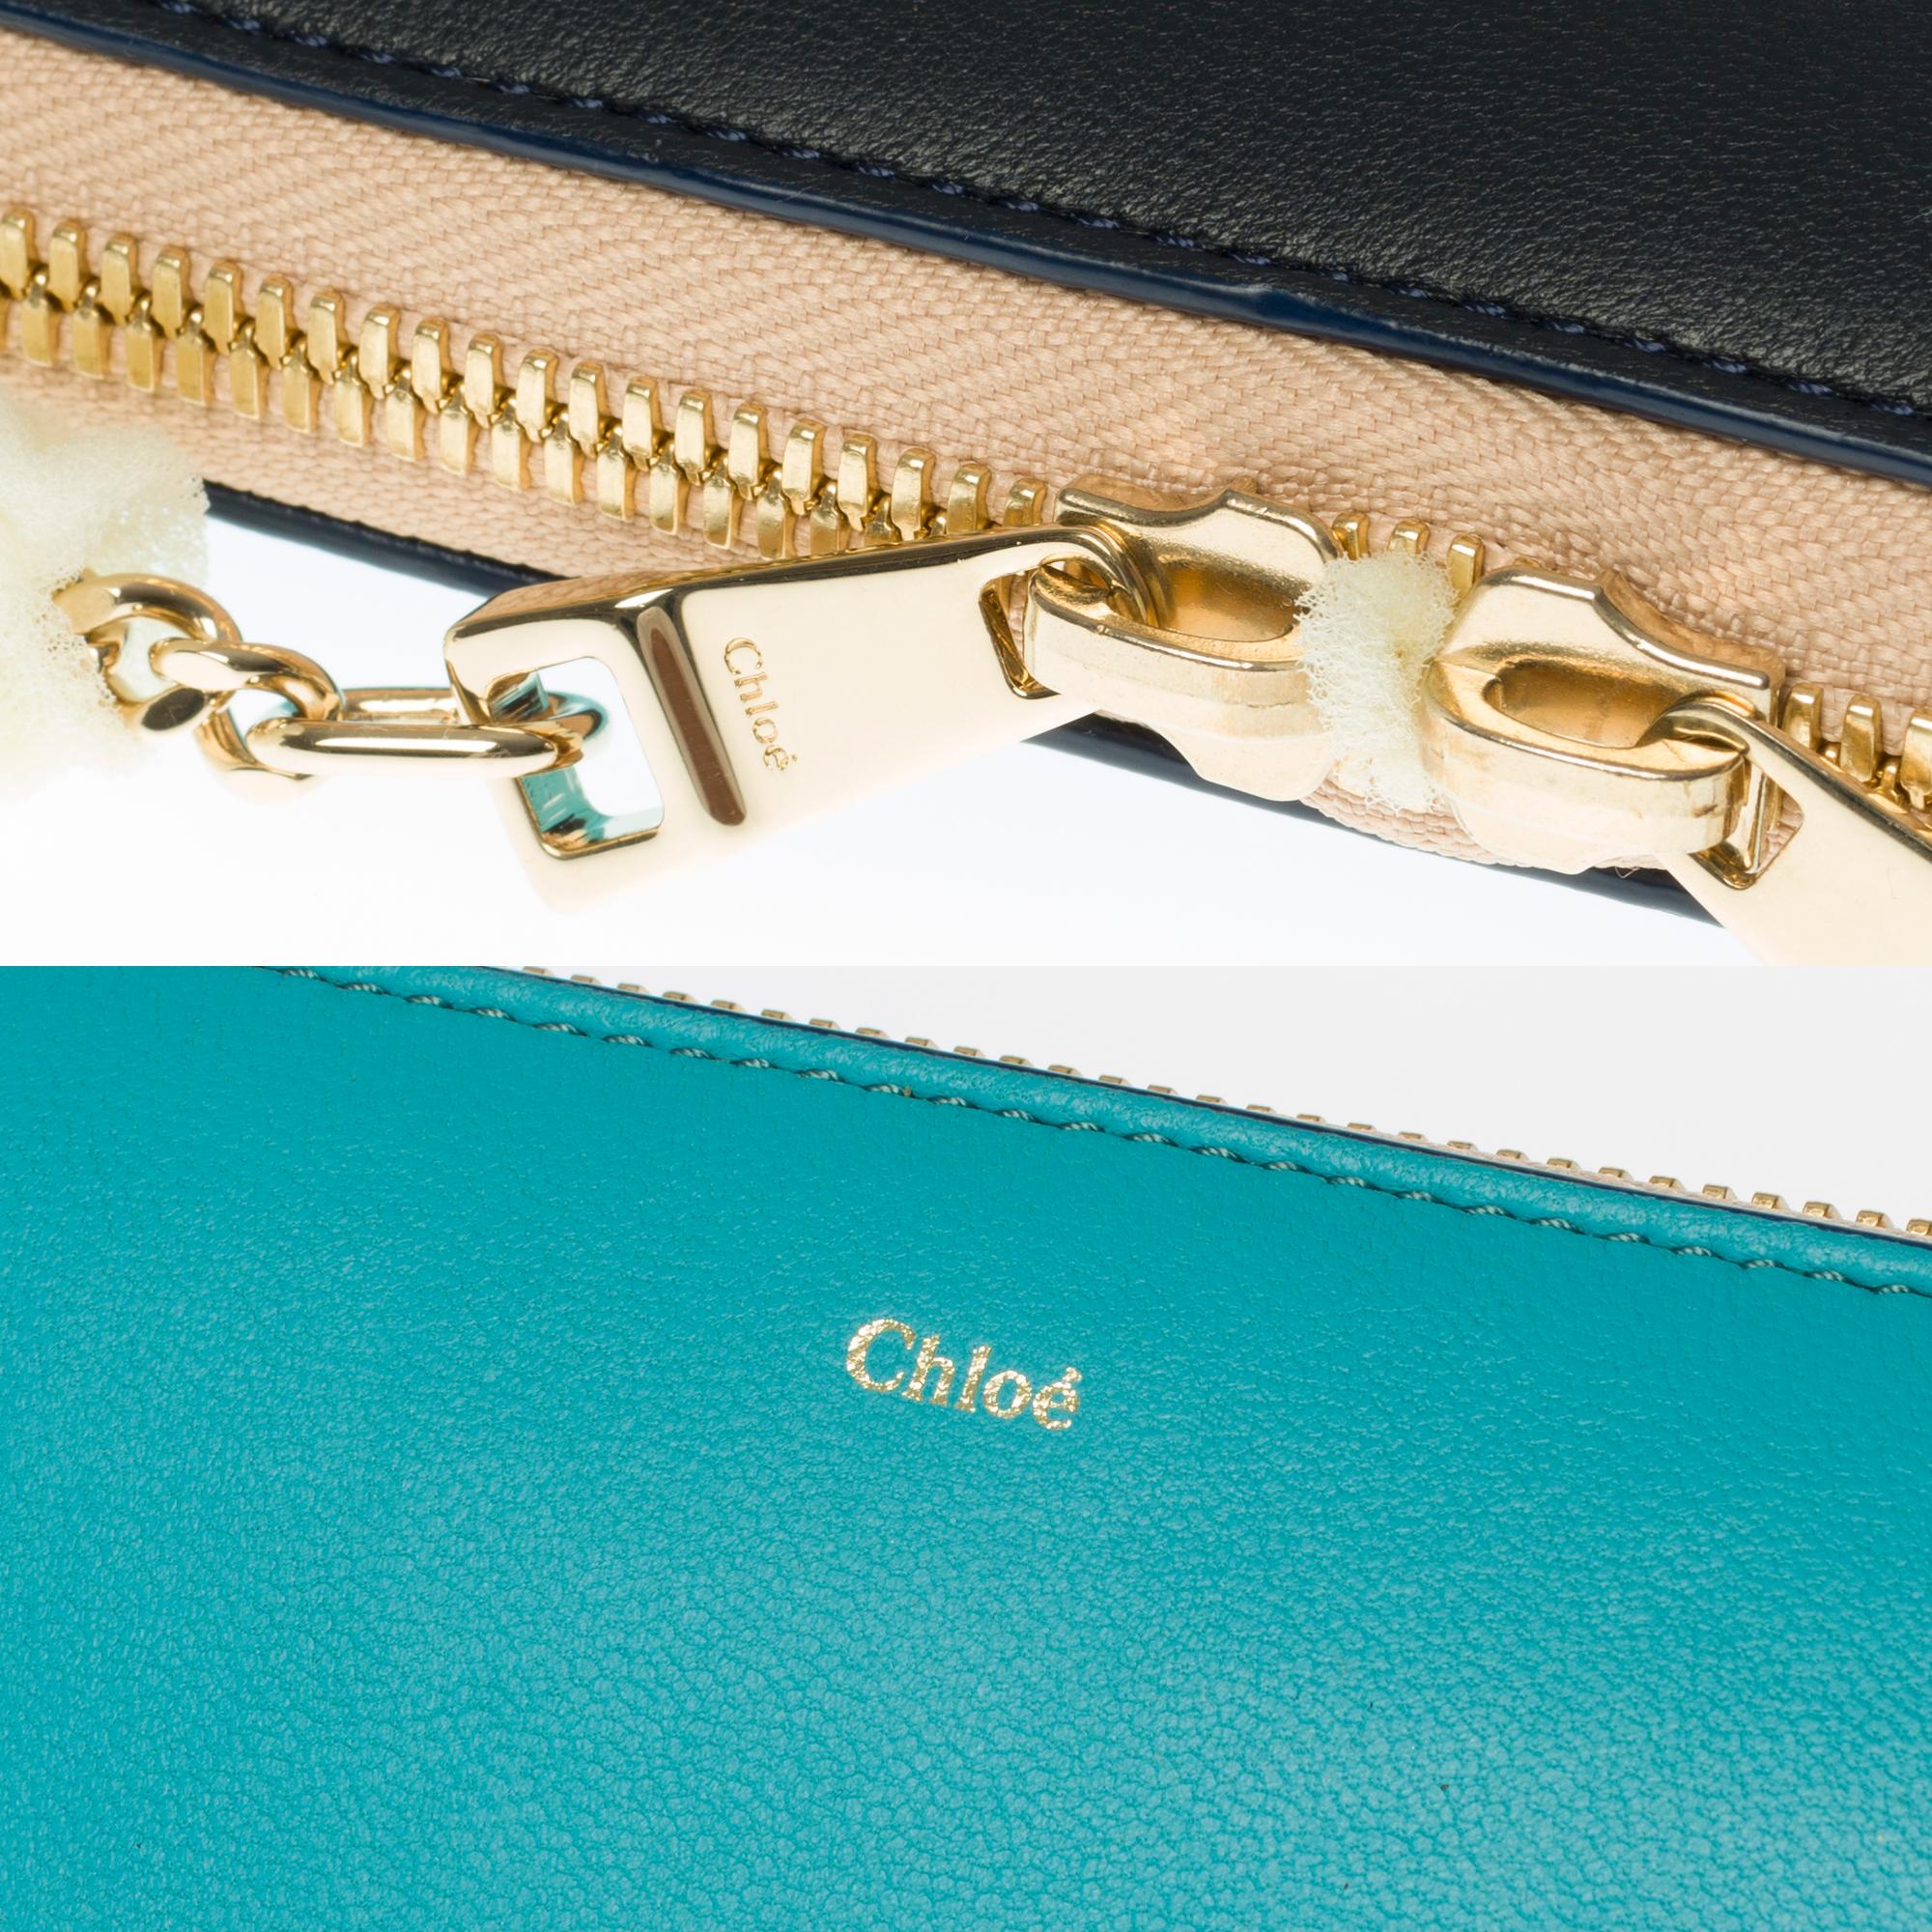 Women's Charming Chloé bicolor wallet in turquoise and black leather with gold hardware